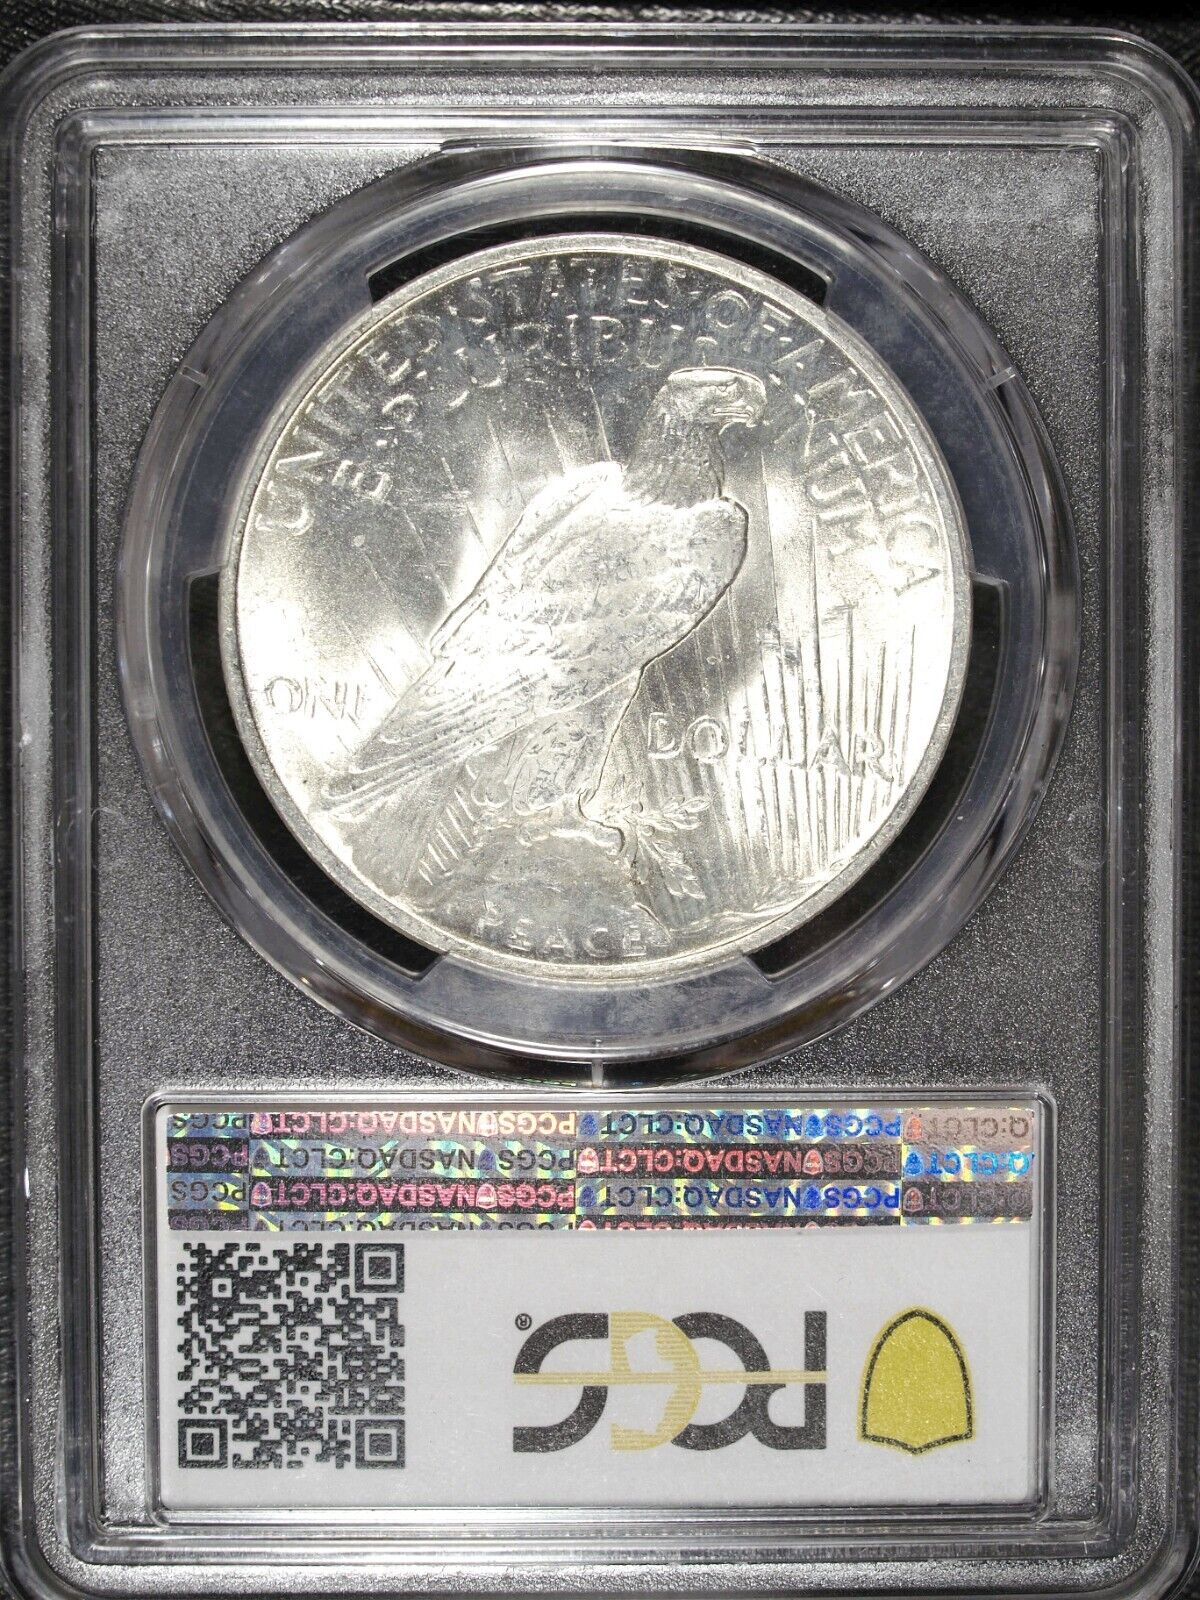 1923 P PCGS MS 65 Peace Silver Dollar ☆☆ Great Collectible ☆☆ Great For Sets 035